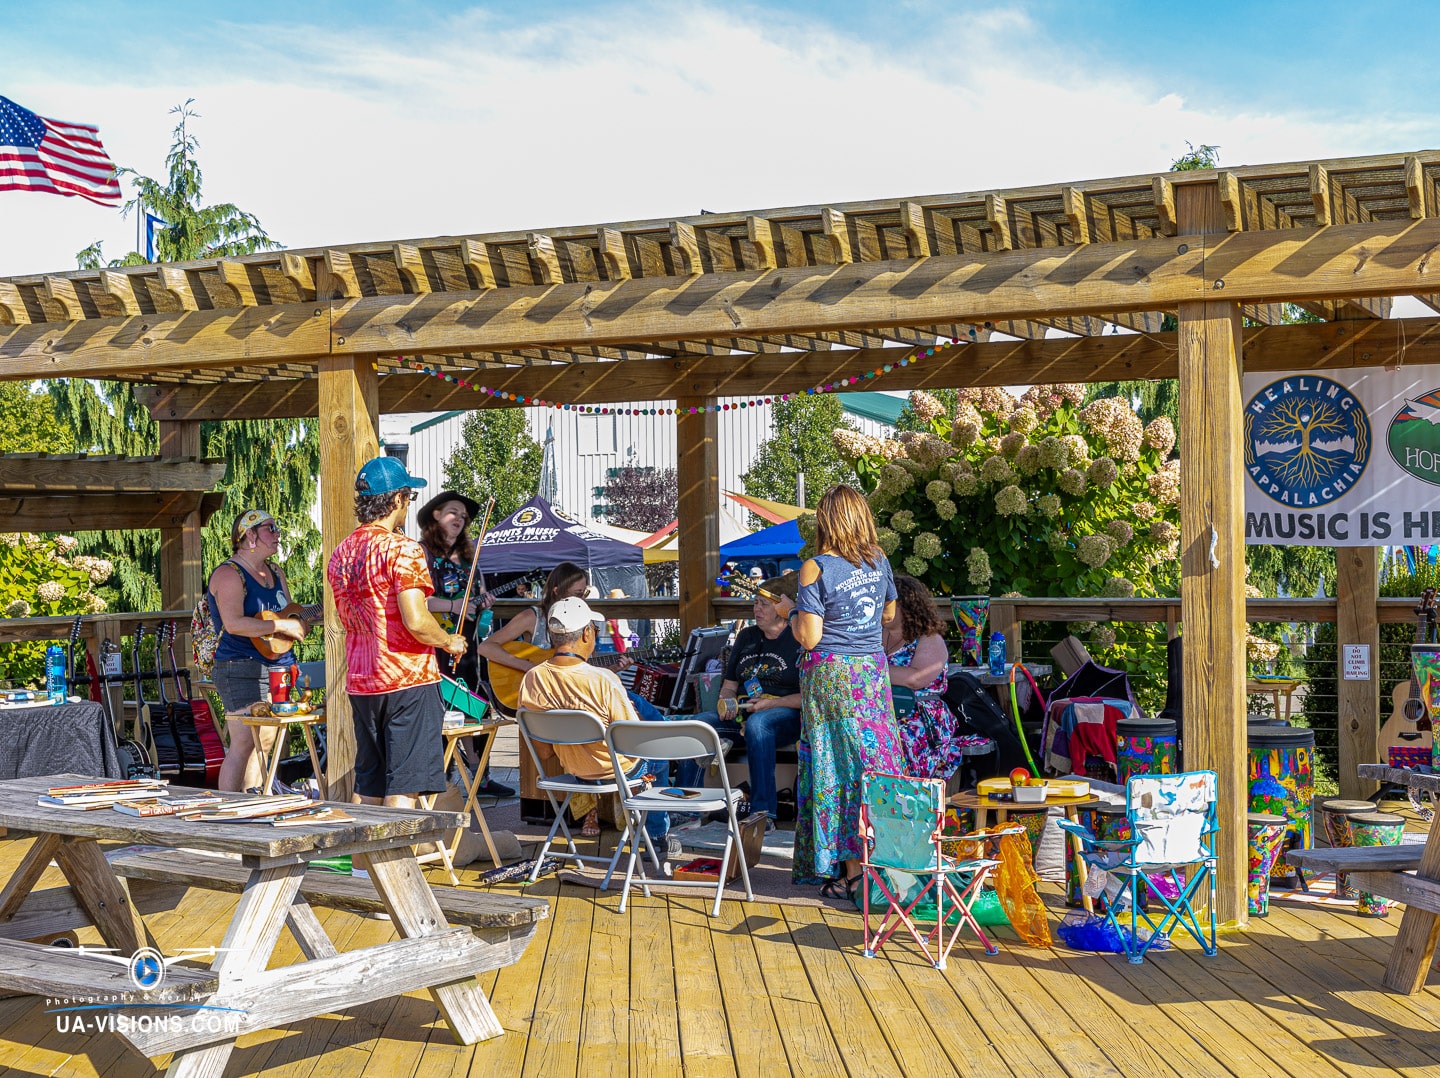 Laid-back festival life on the deck, where every chair has a story at Healing Appalachia.